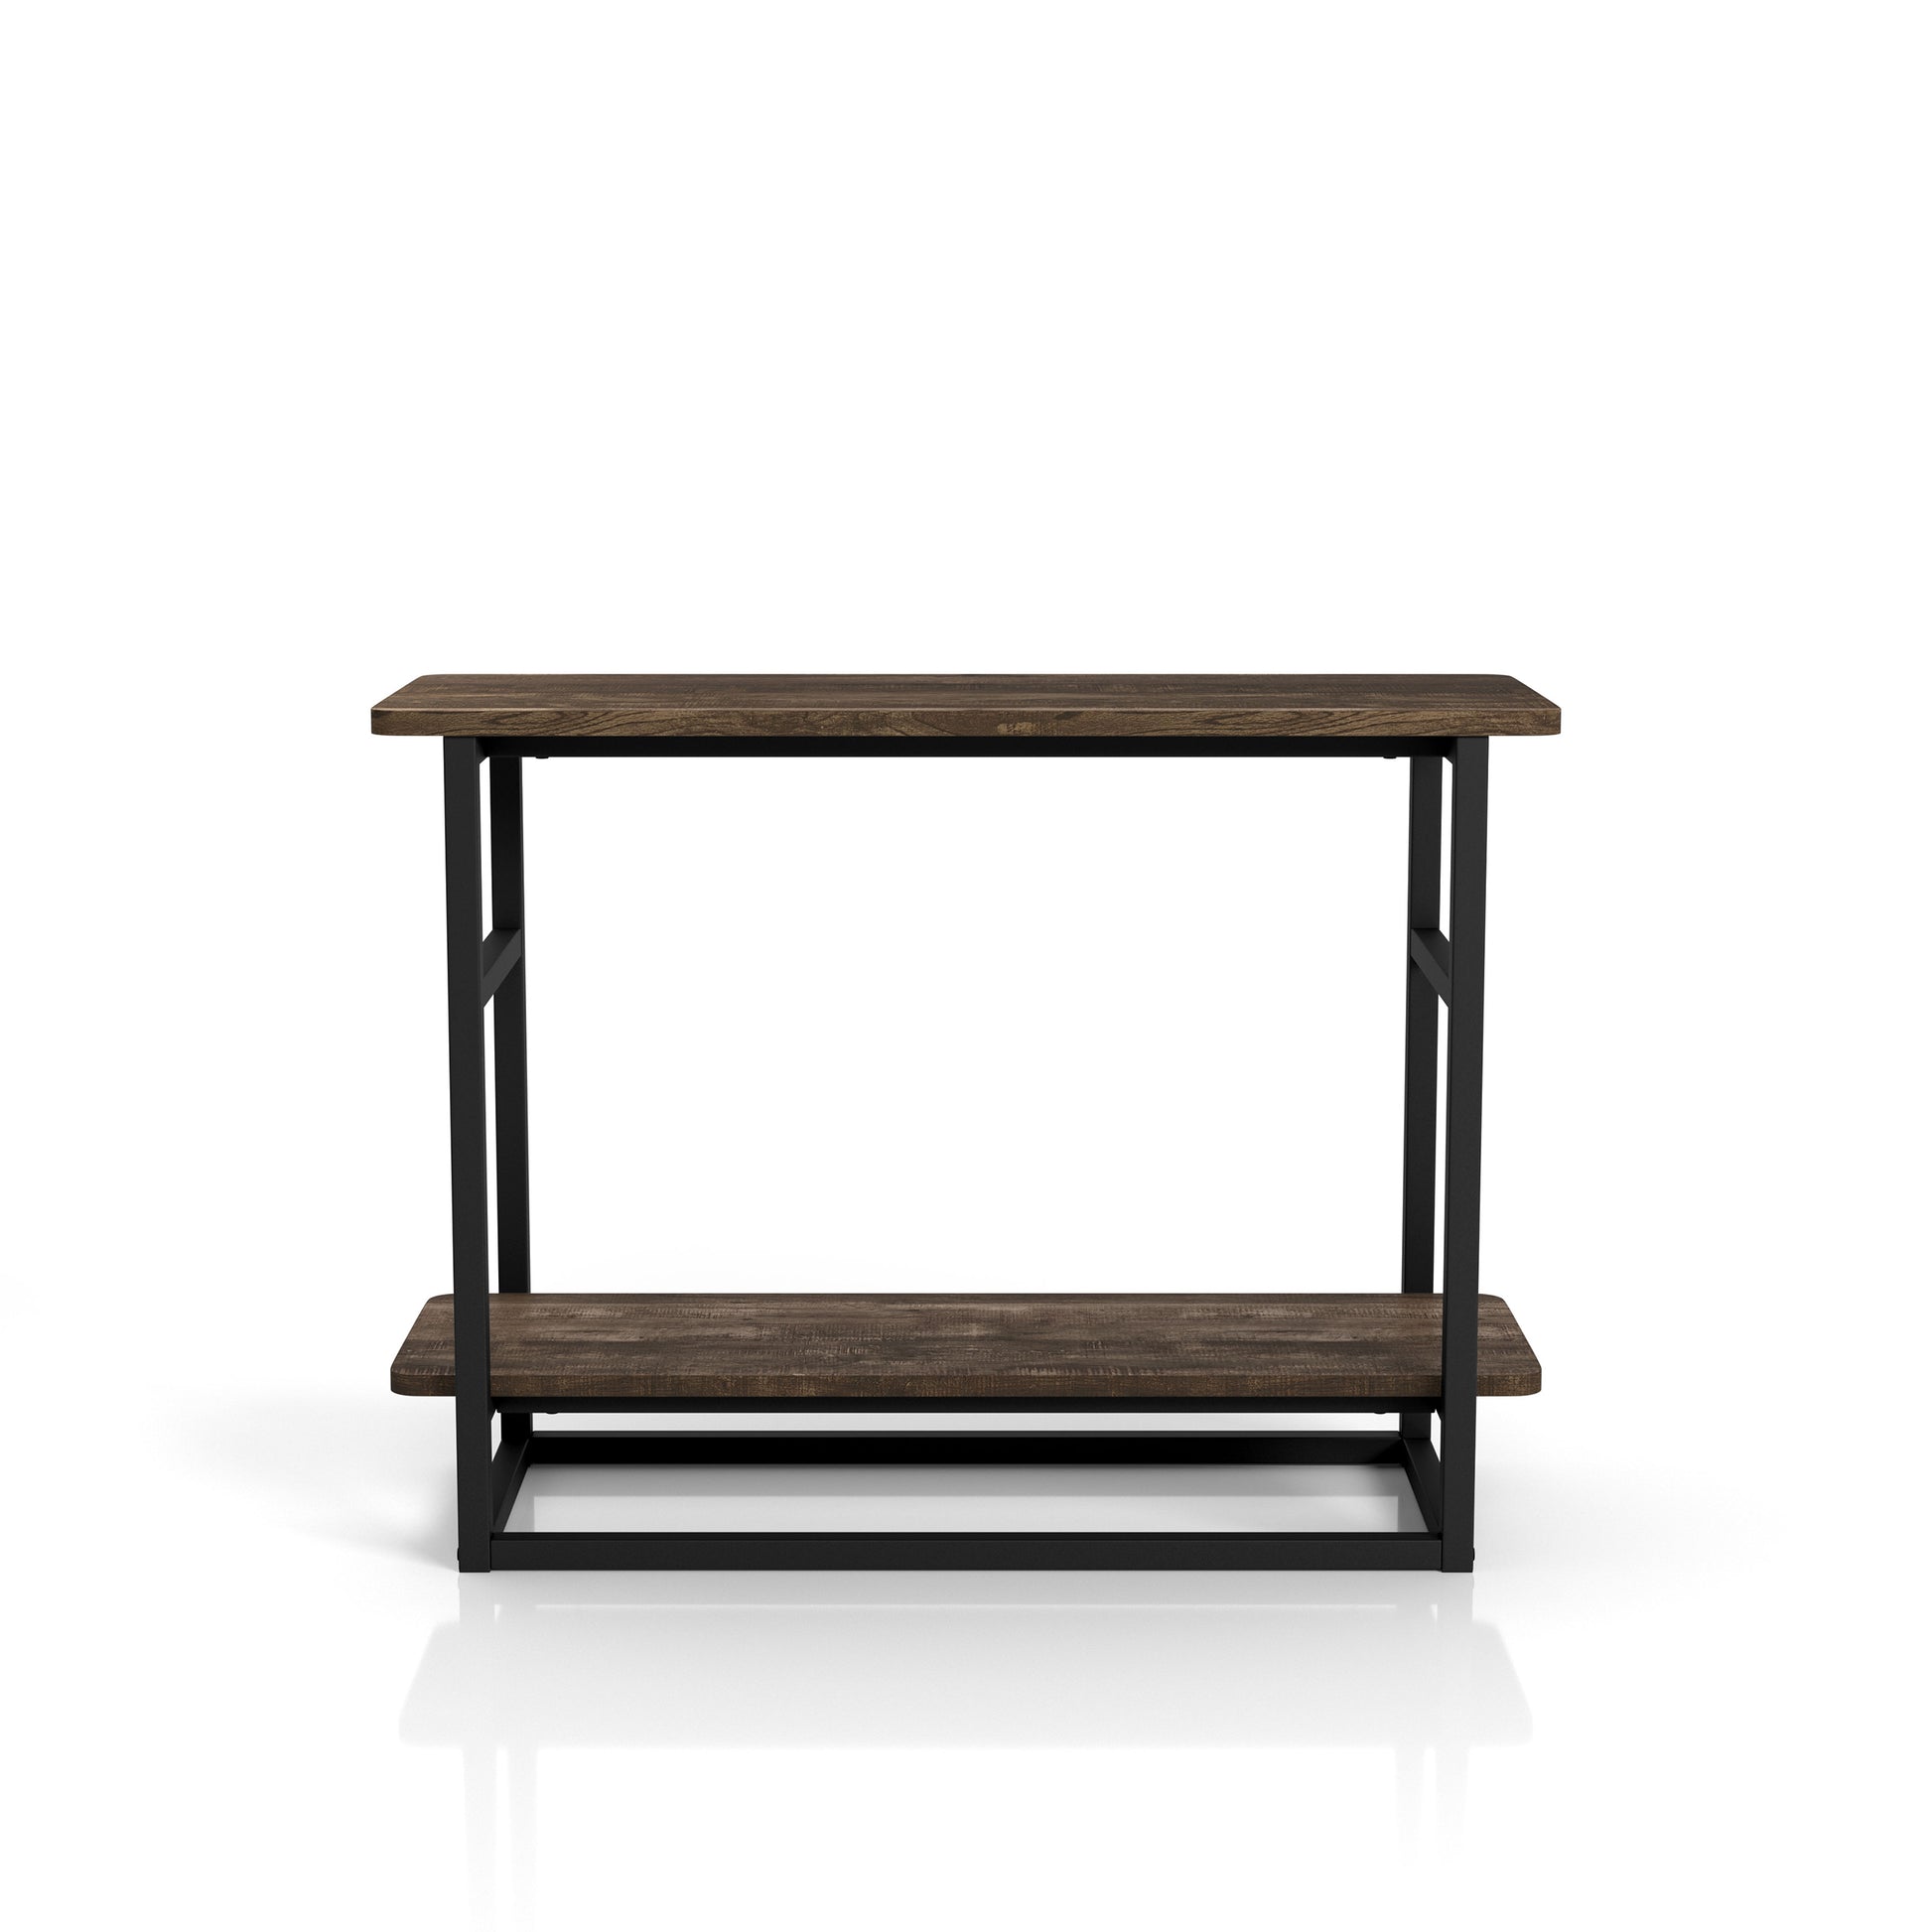 Front-facing side view of a industrial reclaimed oak one-shelf long side table on a white background